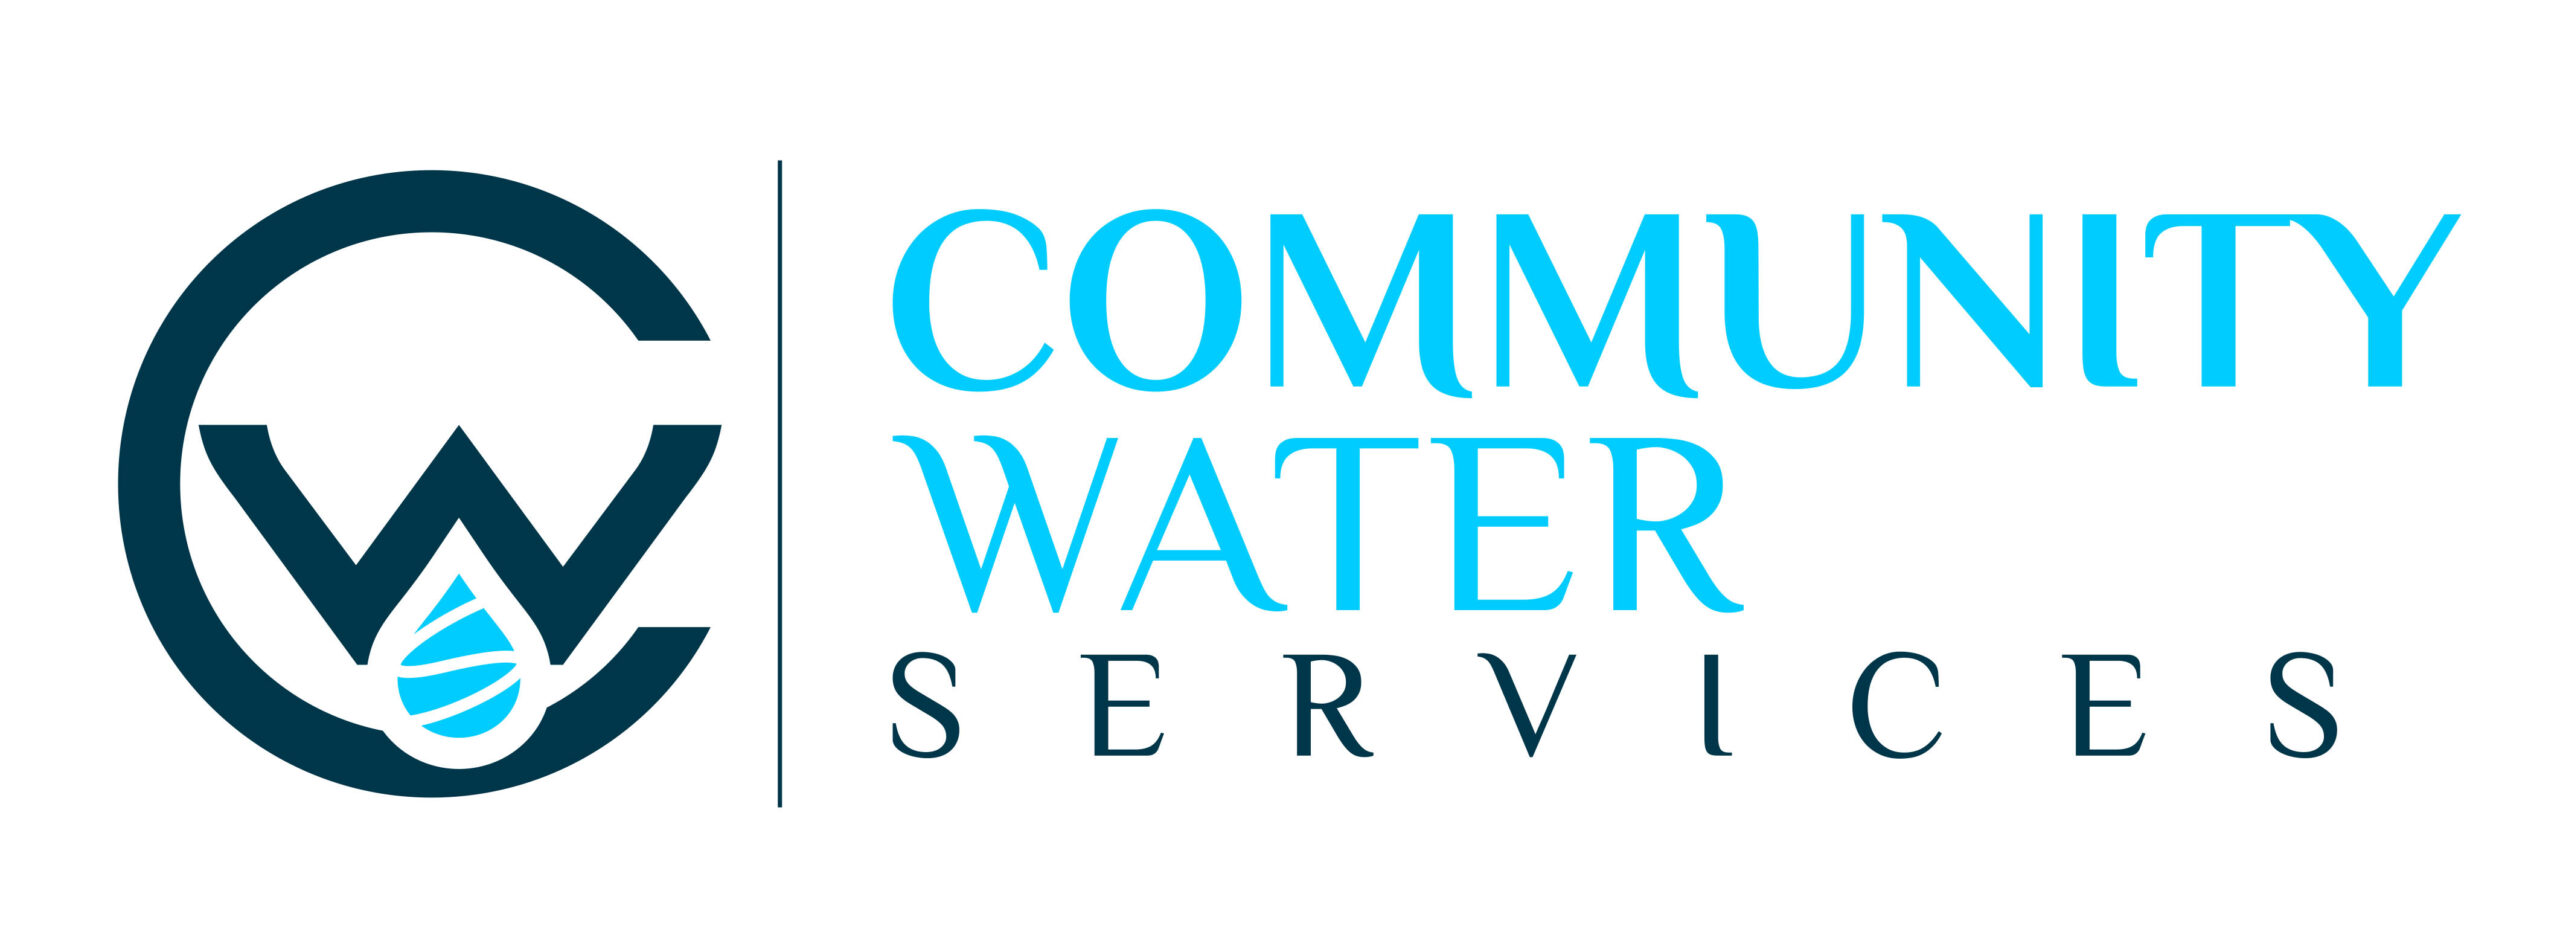 Community Water Services